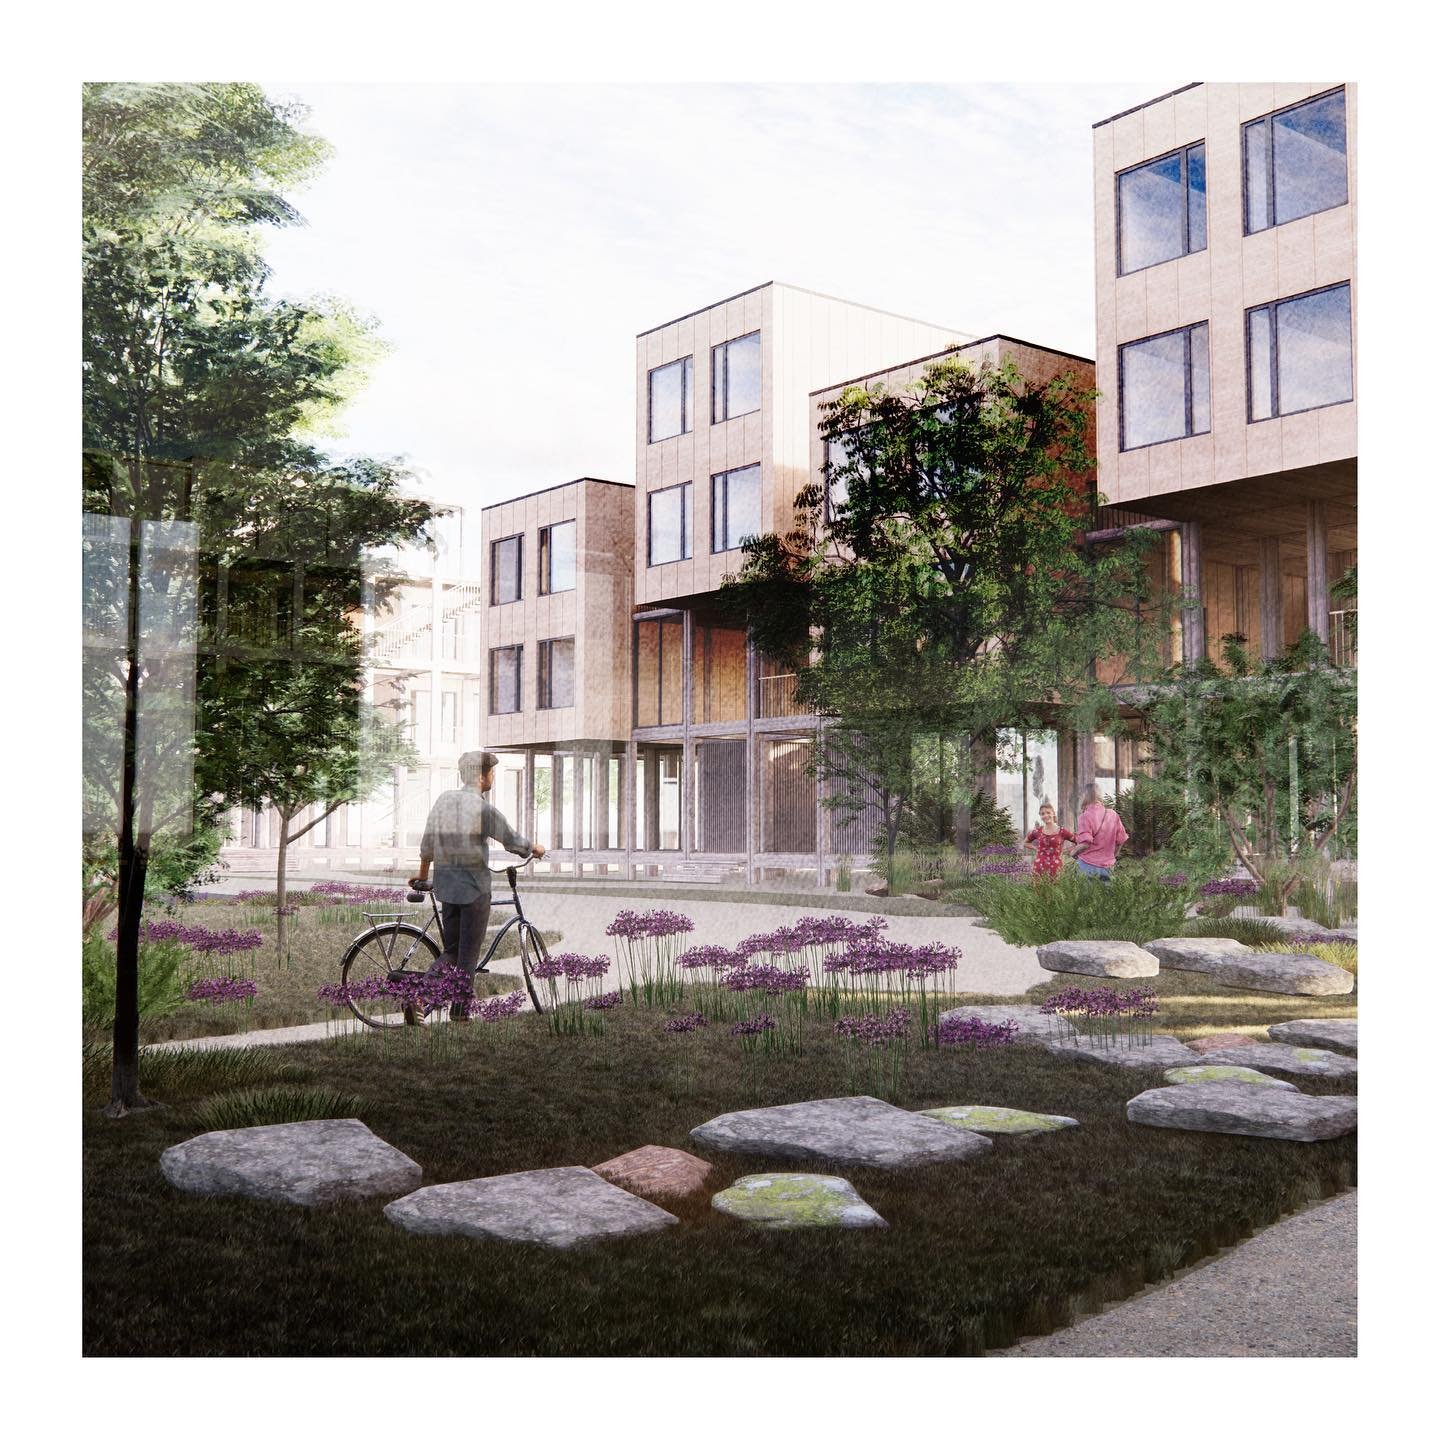 Ongoing ideas and studies for the future use of Cph Village Jernbanebyen, exploring possible transformations and adaptations for future needs. 

Cph Village @cphvillage provides student housing built on the values of community, temporality and planet